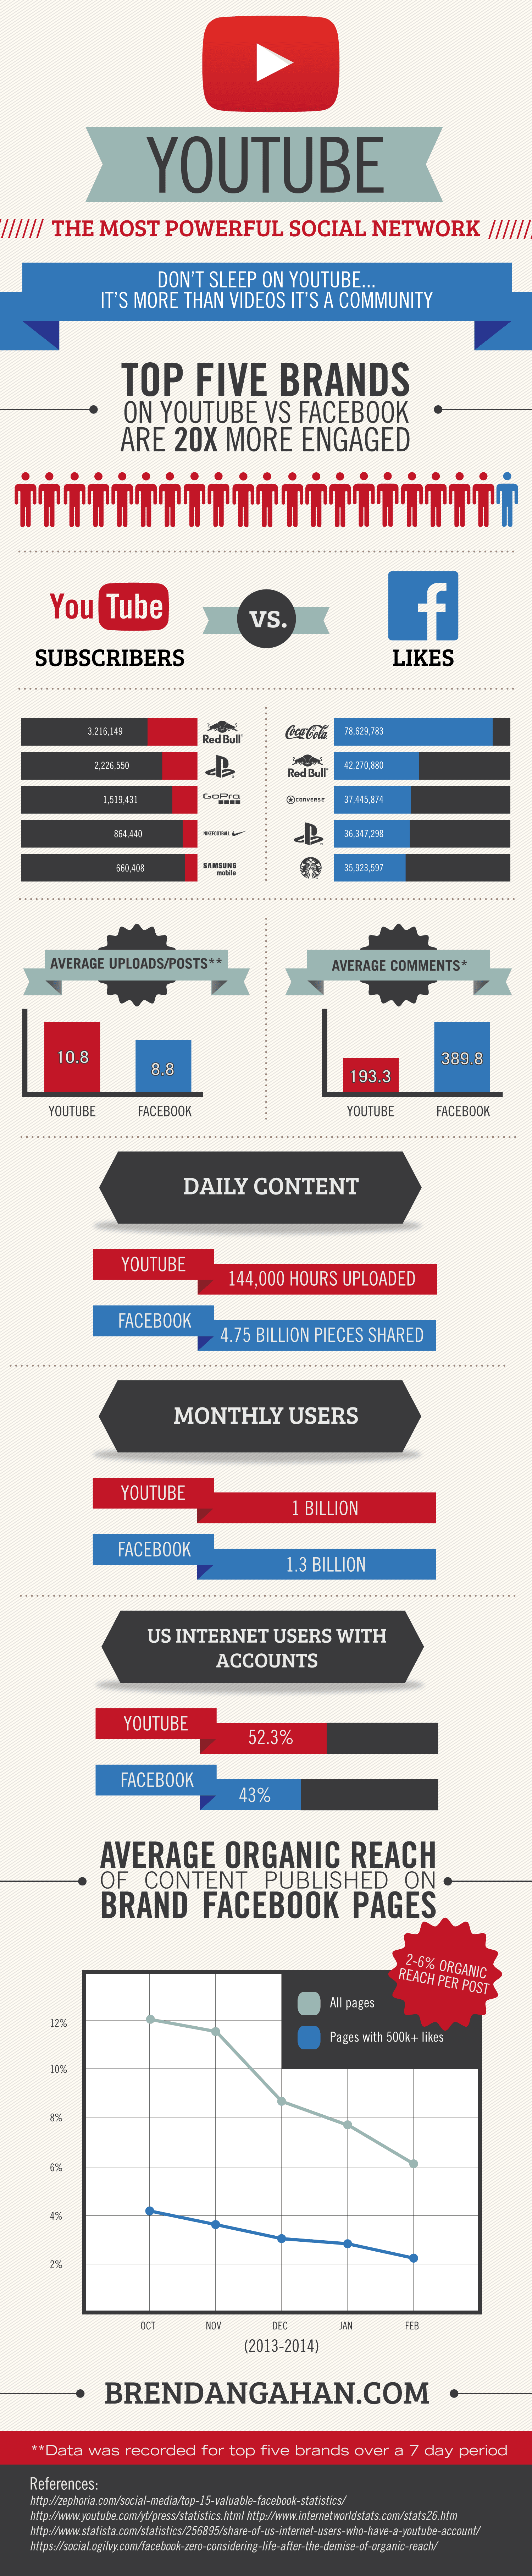 YouTube vs Facebook Infographic